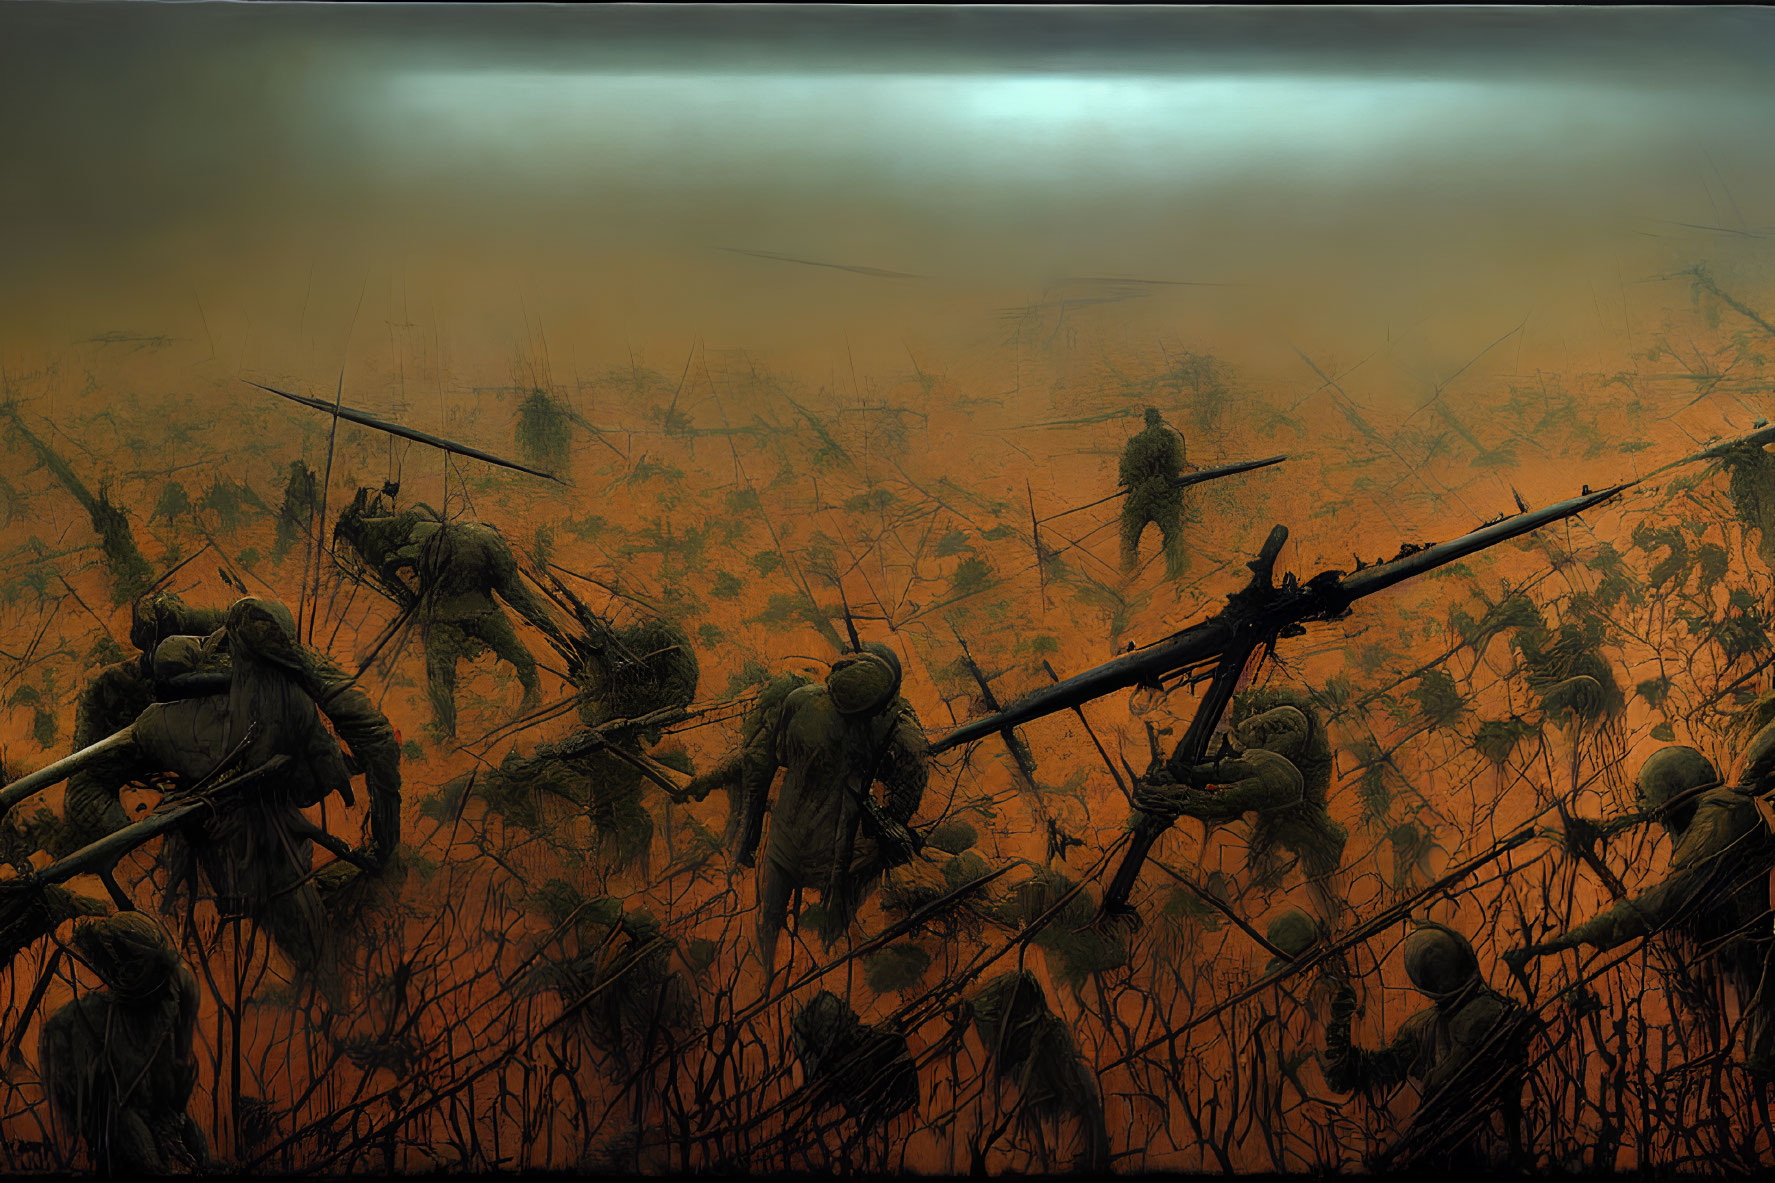 Silhouette soldiers in misty battlefield with rifles and bayonets